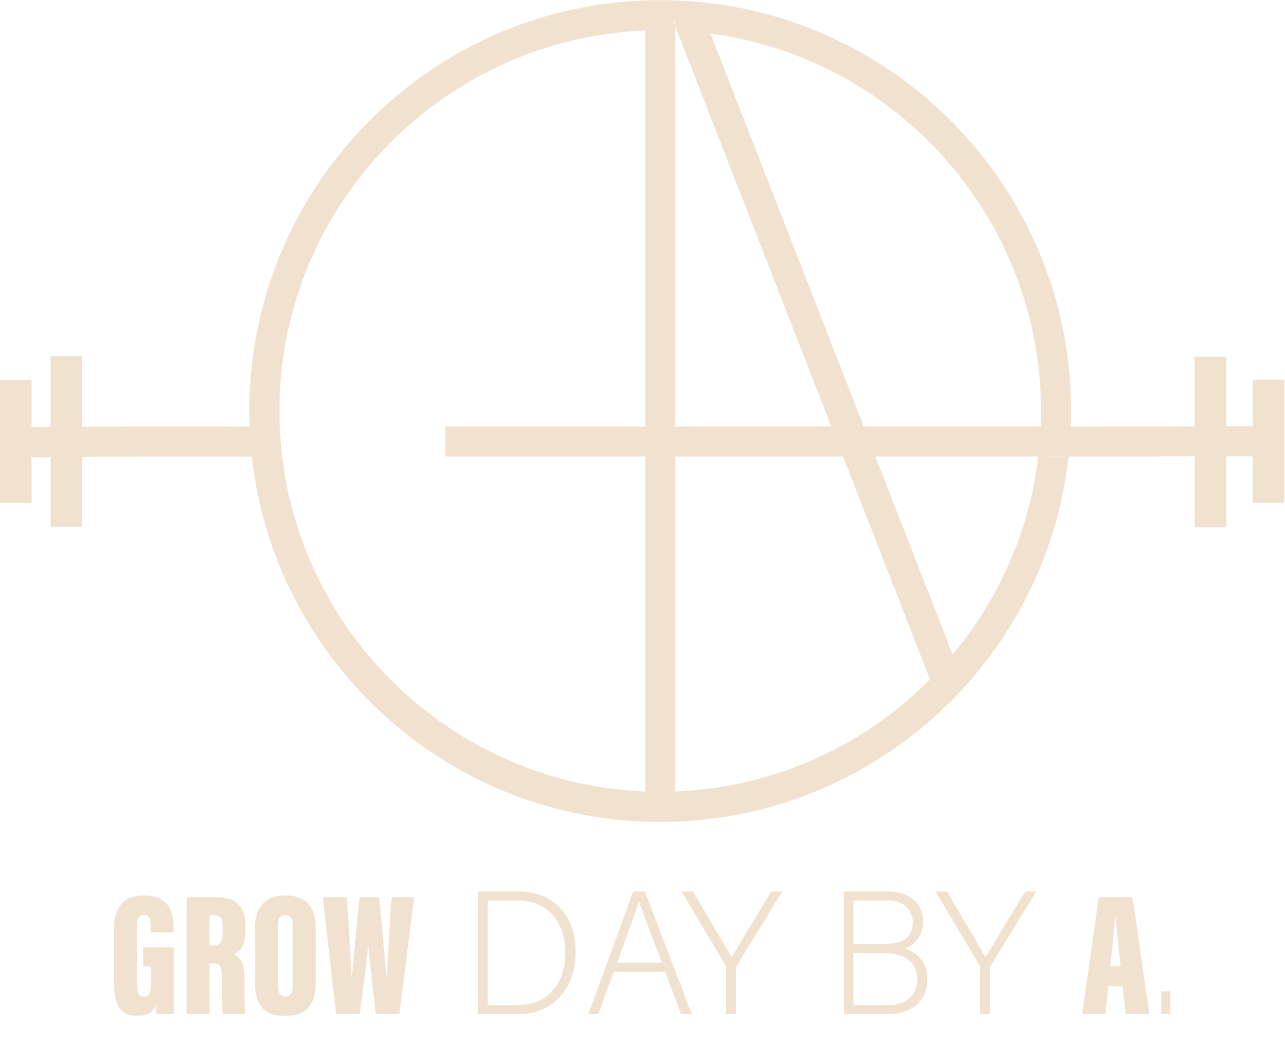 Grow Day By A